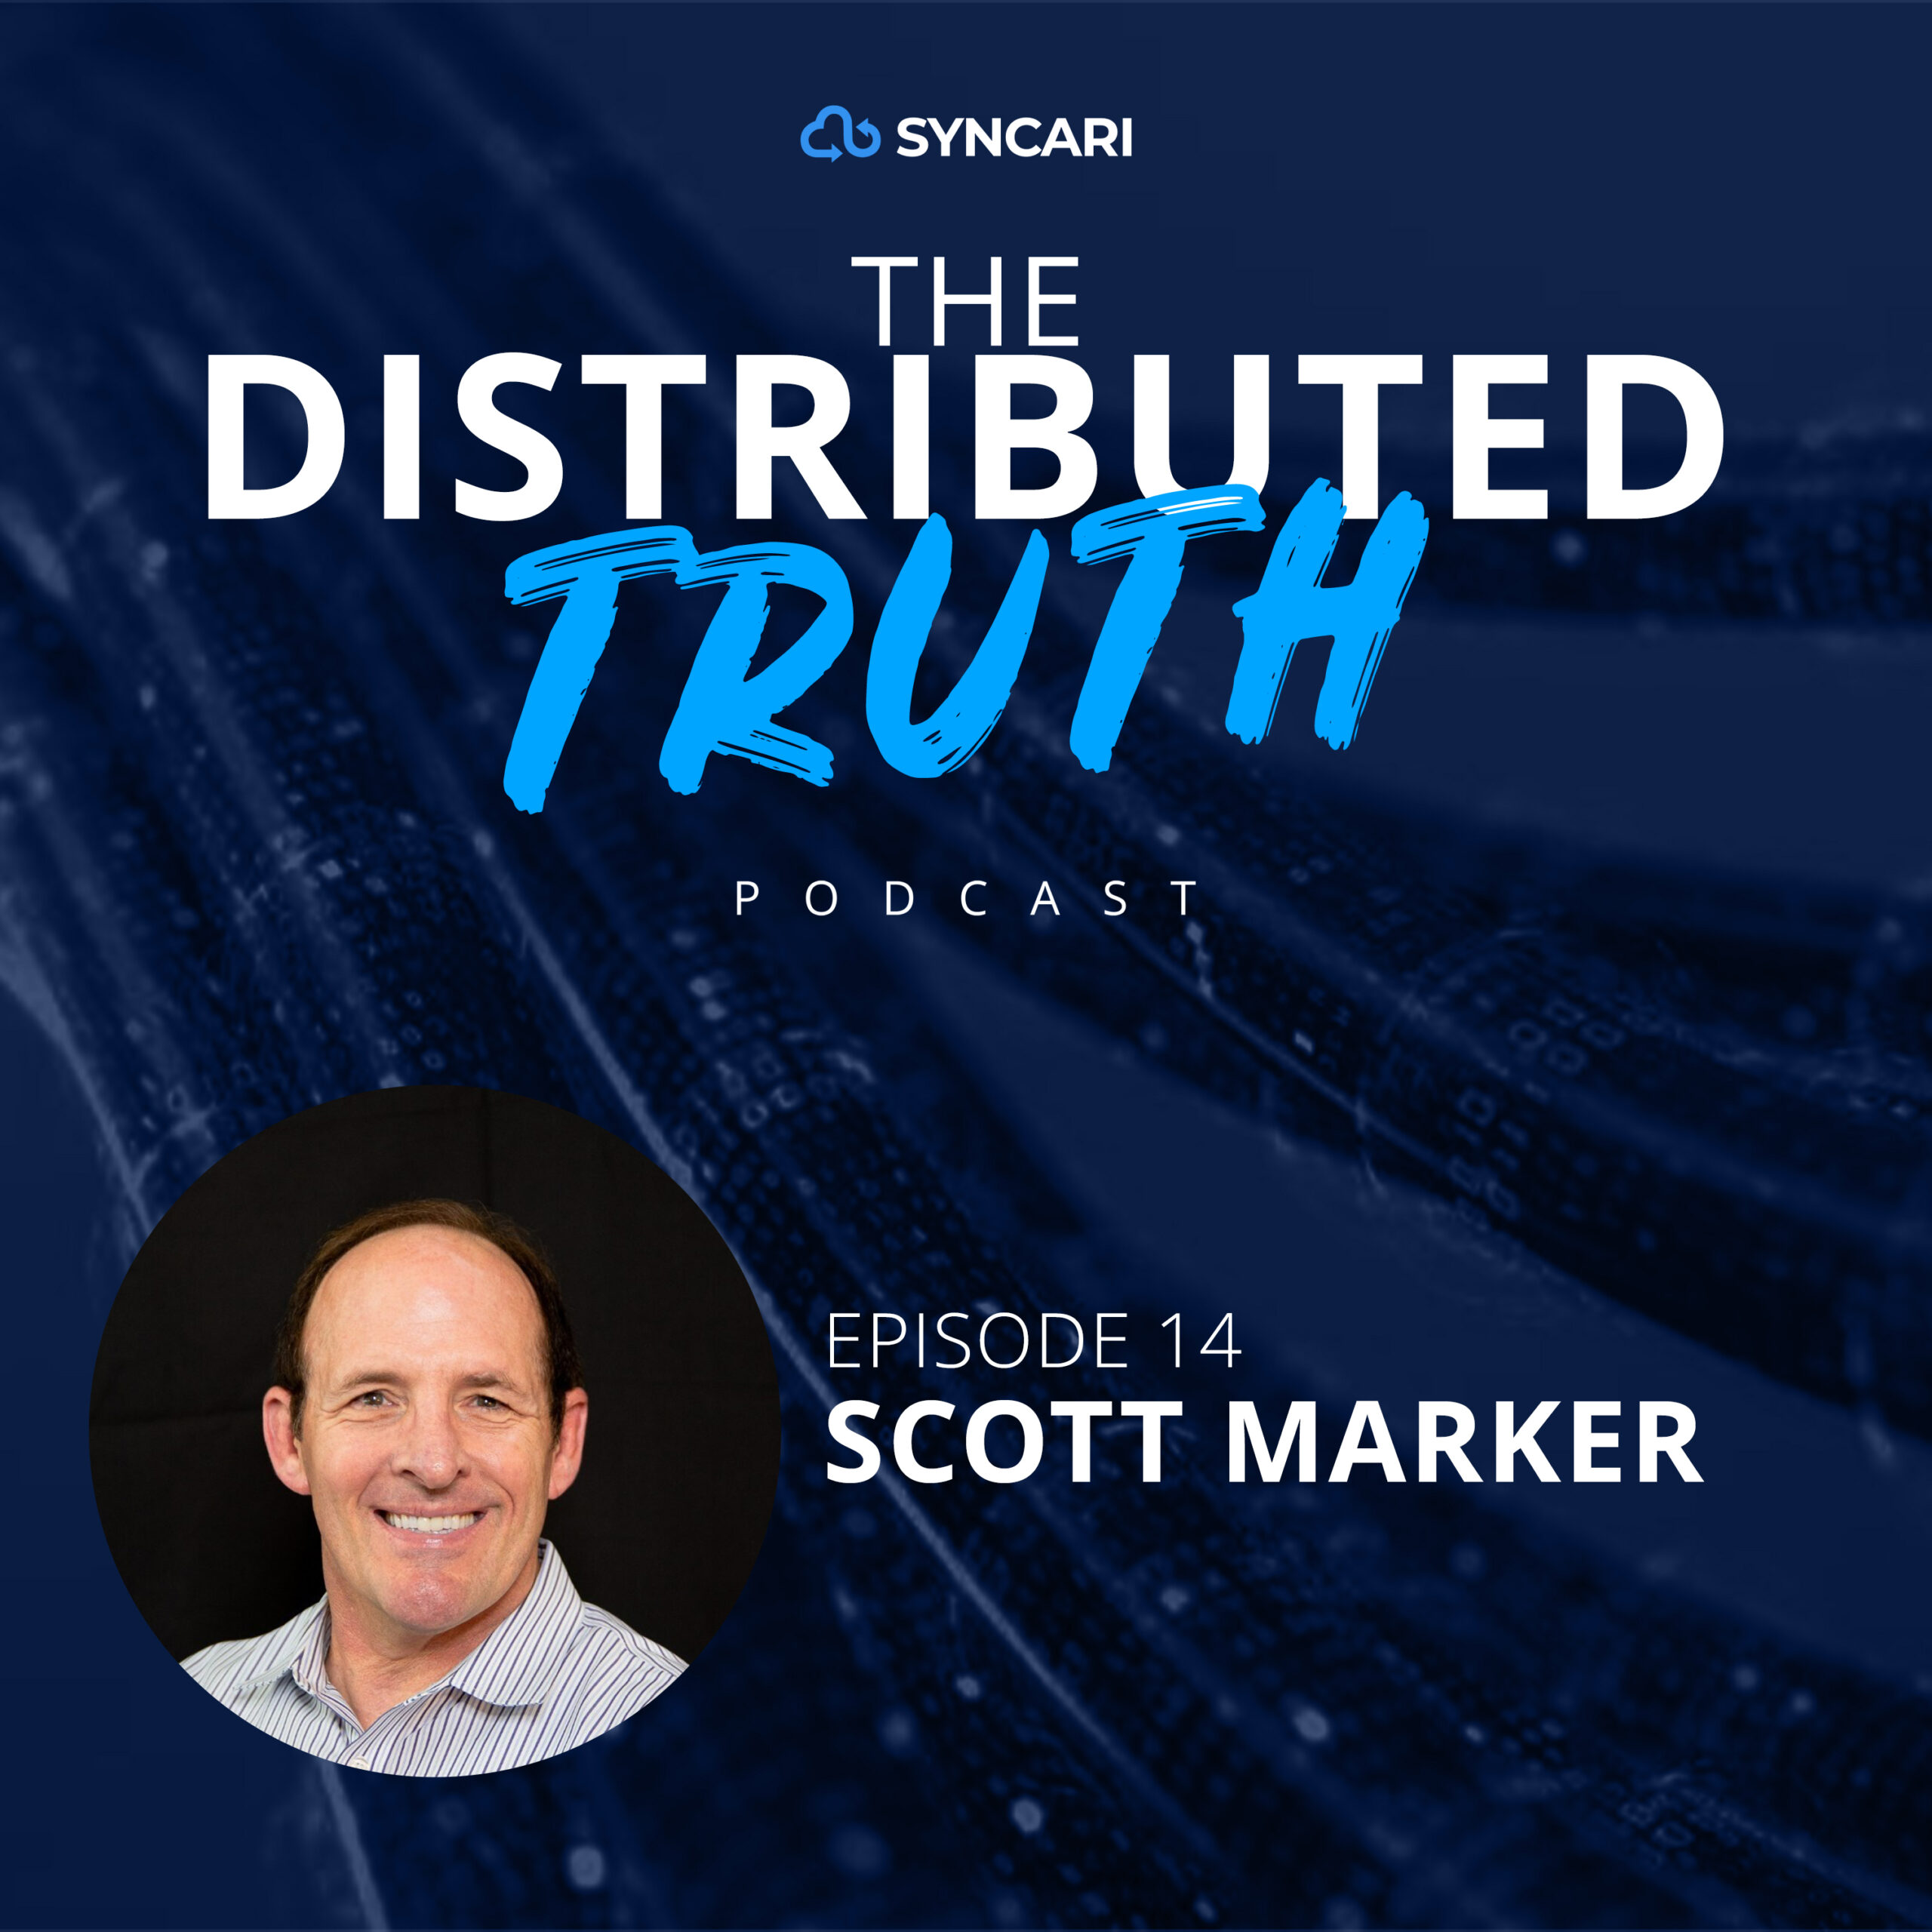 Episode 14: The Problem of Human Behavior and CRM Data, with Scott Marker